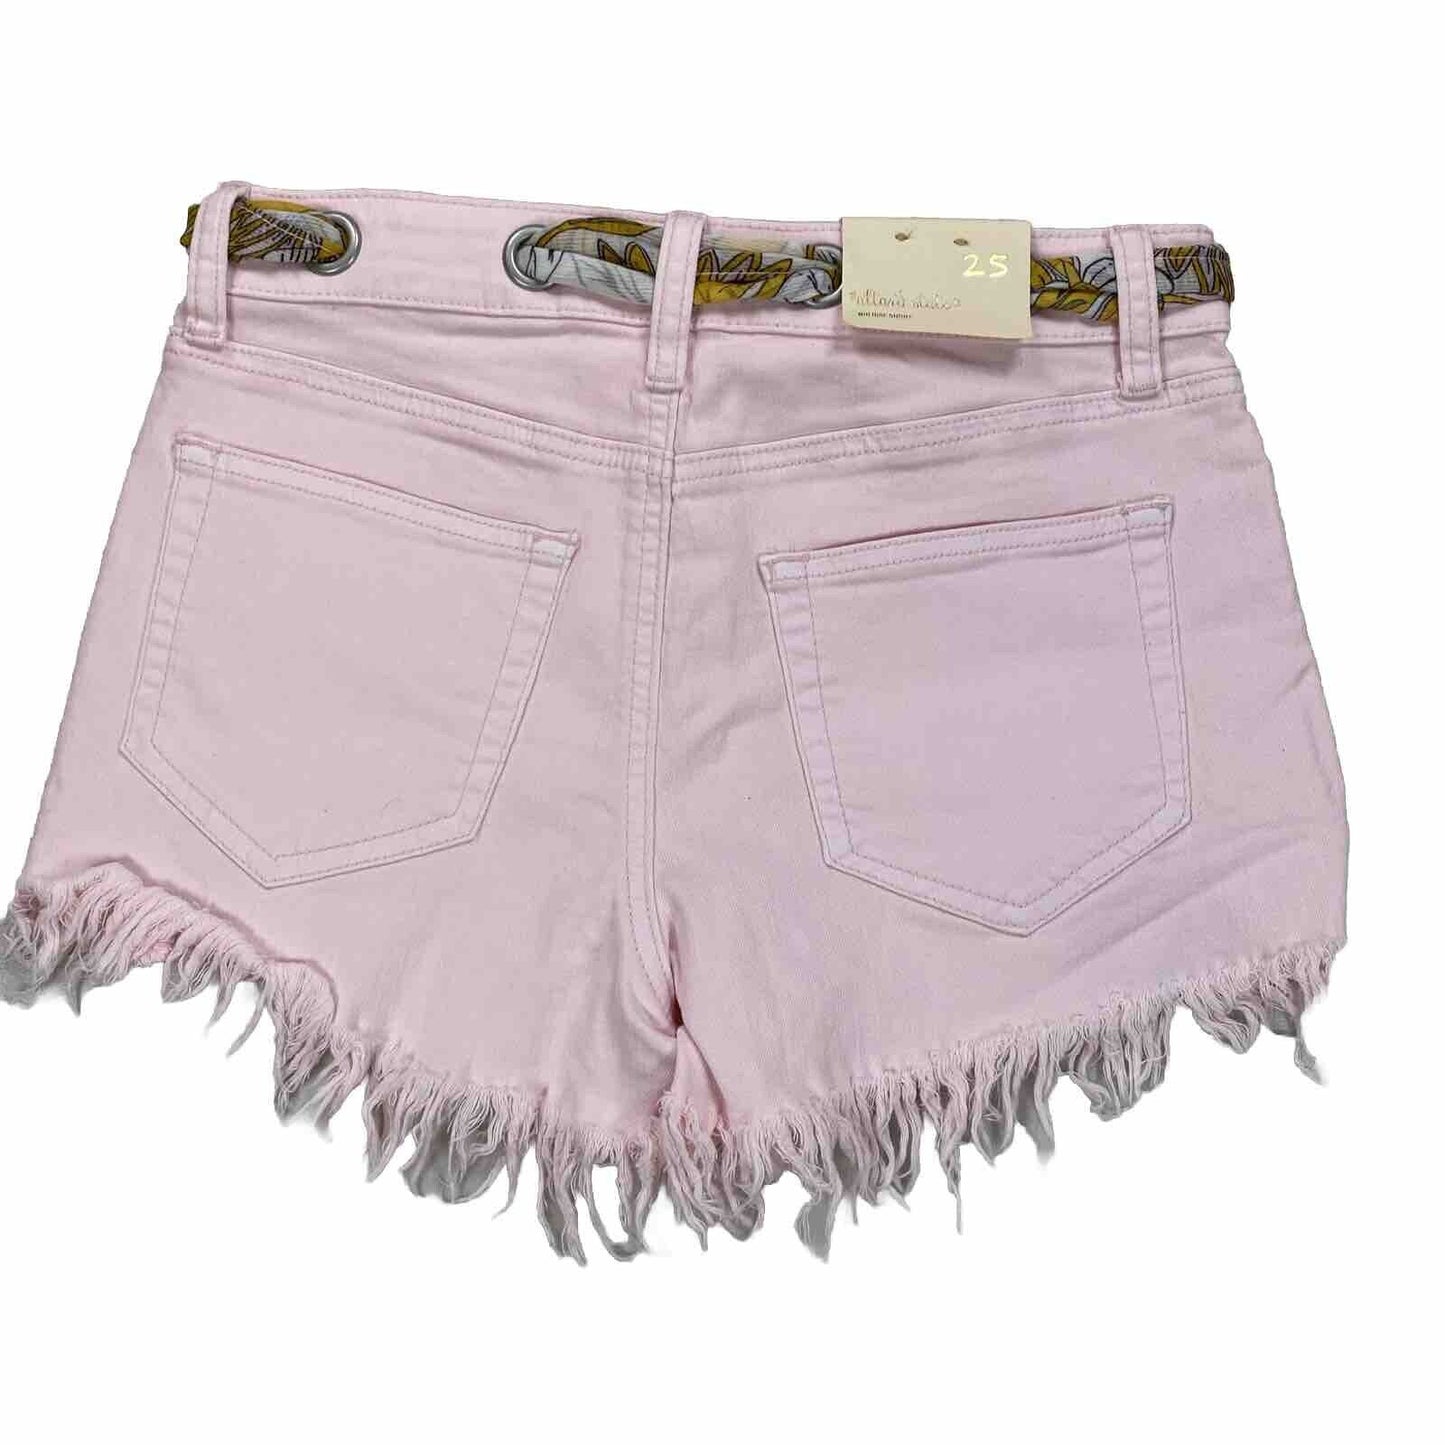 NEW Altar'd State Women's Pale Pink Denim Button Fly Jean Shorts - 25